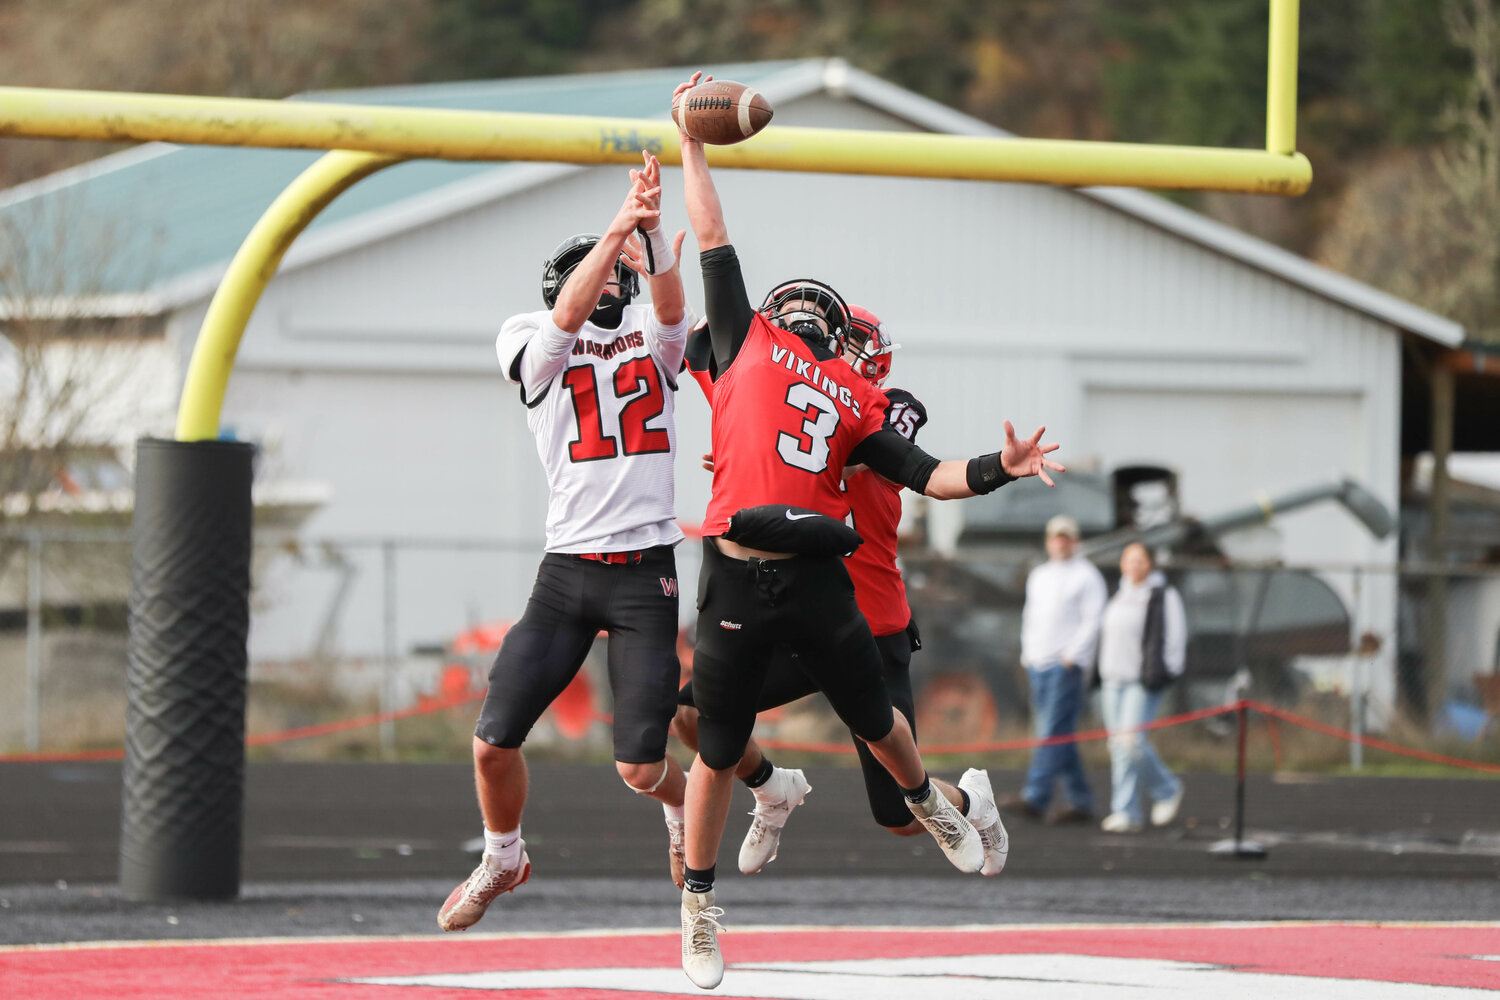 Easton Kolb comes down with a one-handed interception during the first half of Mossyrock's 46-30 win over Almira-Coulee-Hartline in the 1B state quarterfinals, Nov. 18 in Tenino.